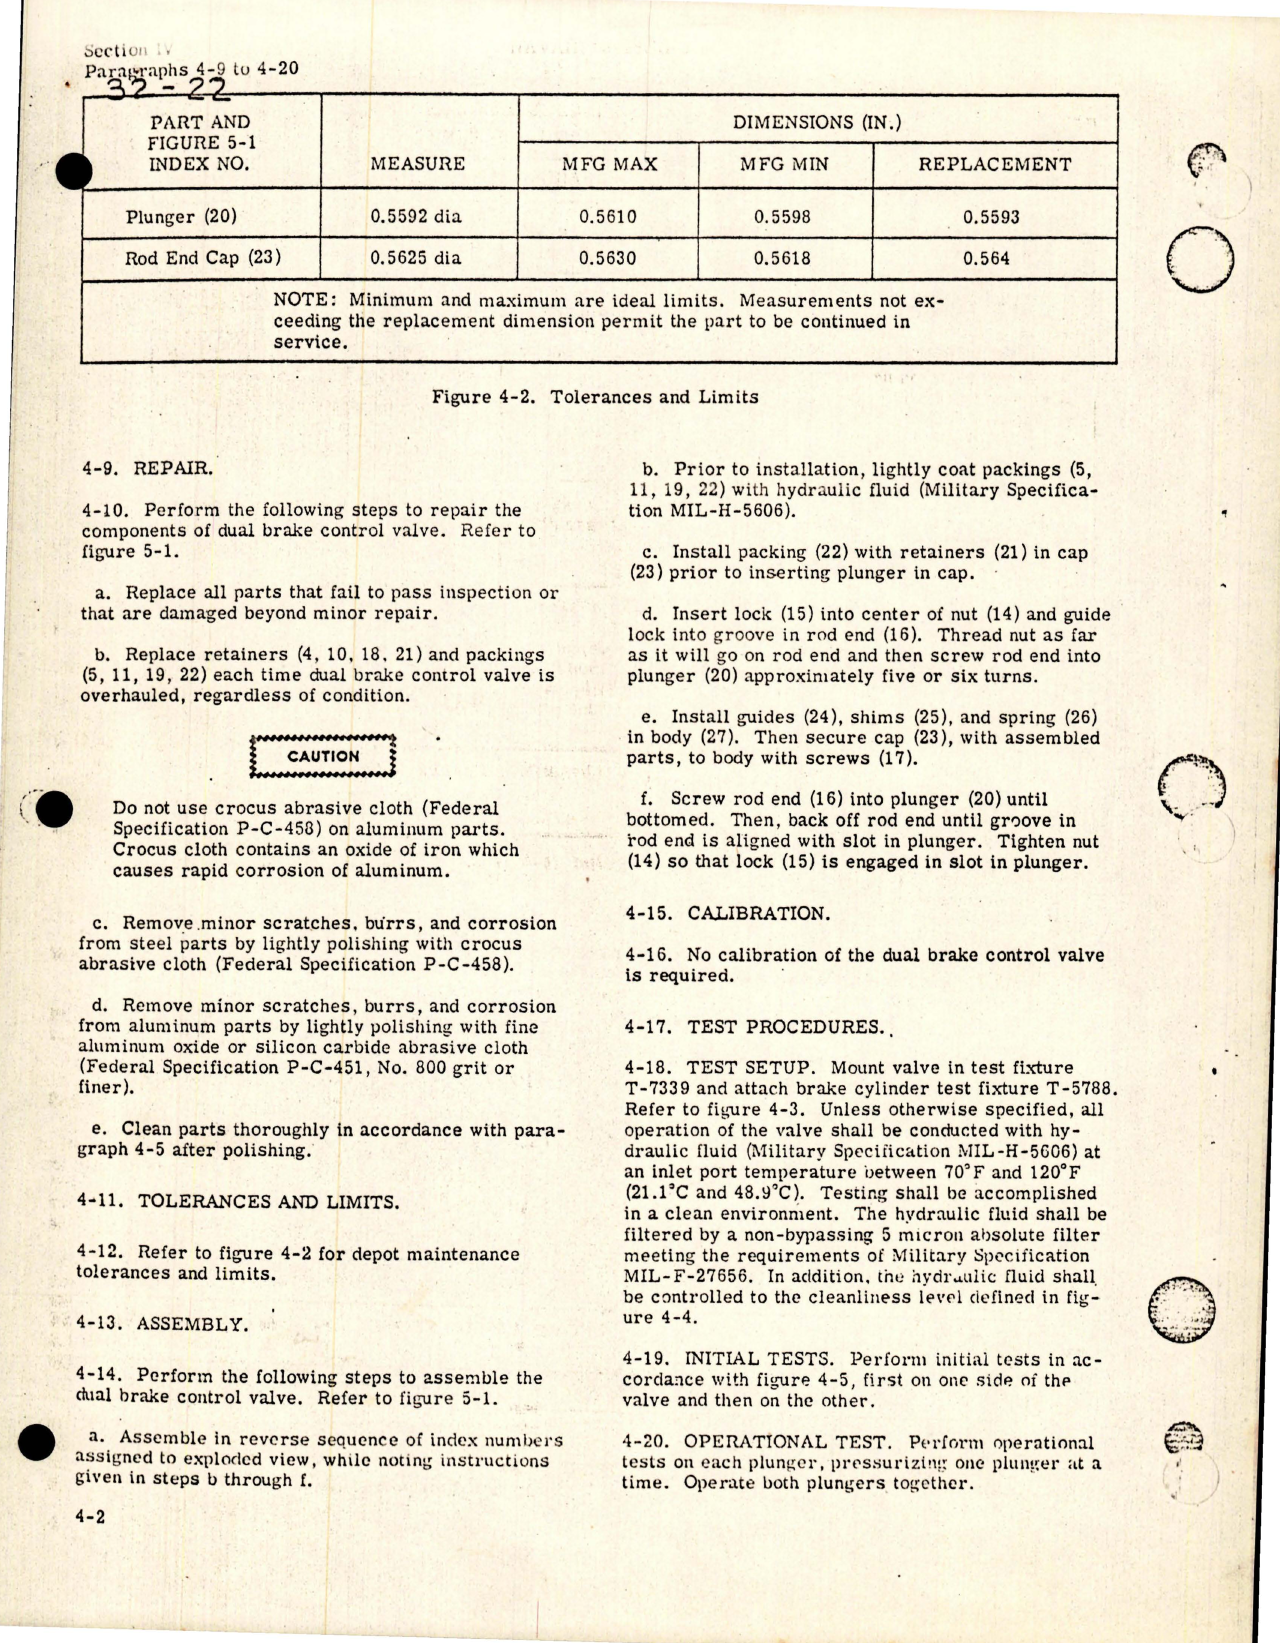 Sample page 7 from AirCorps Library document: Maintenance for Dual Brake Control Valve - Part 23410-3 